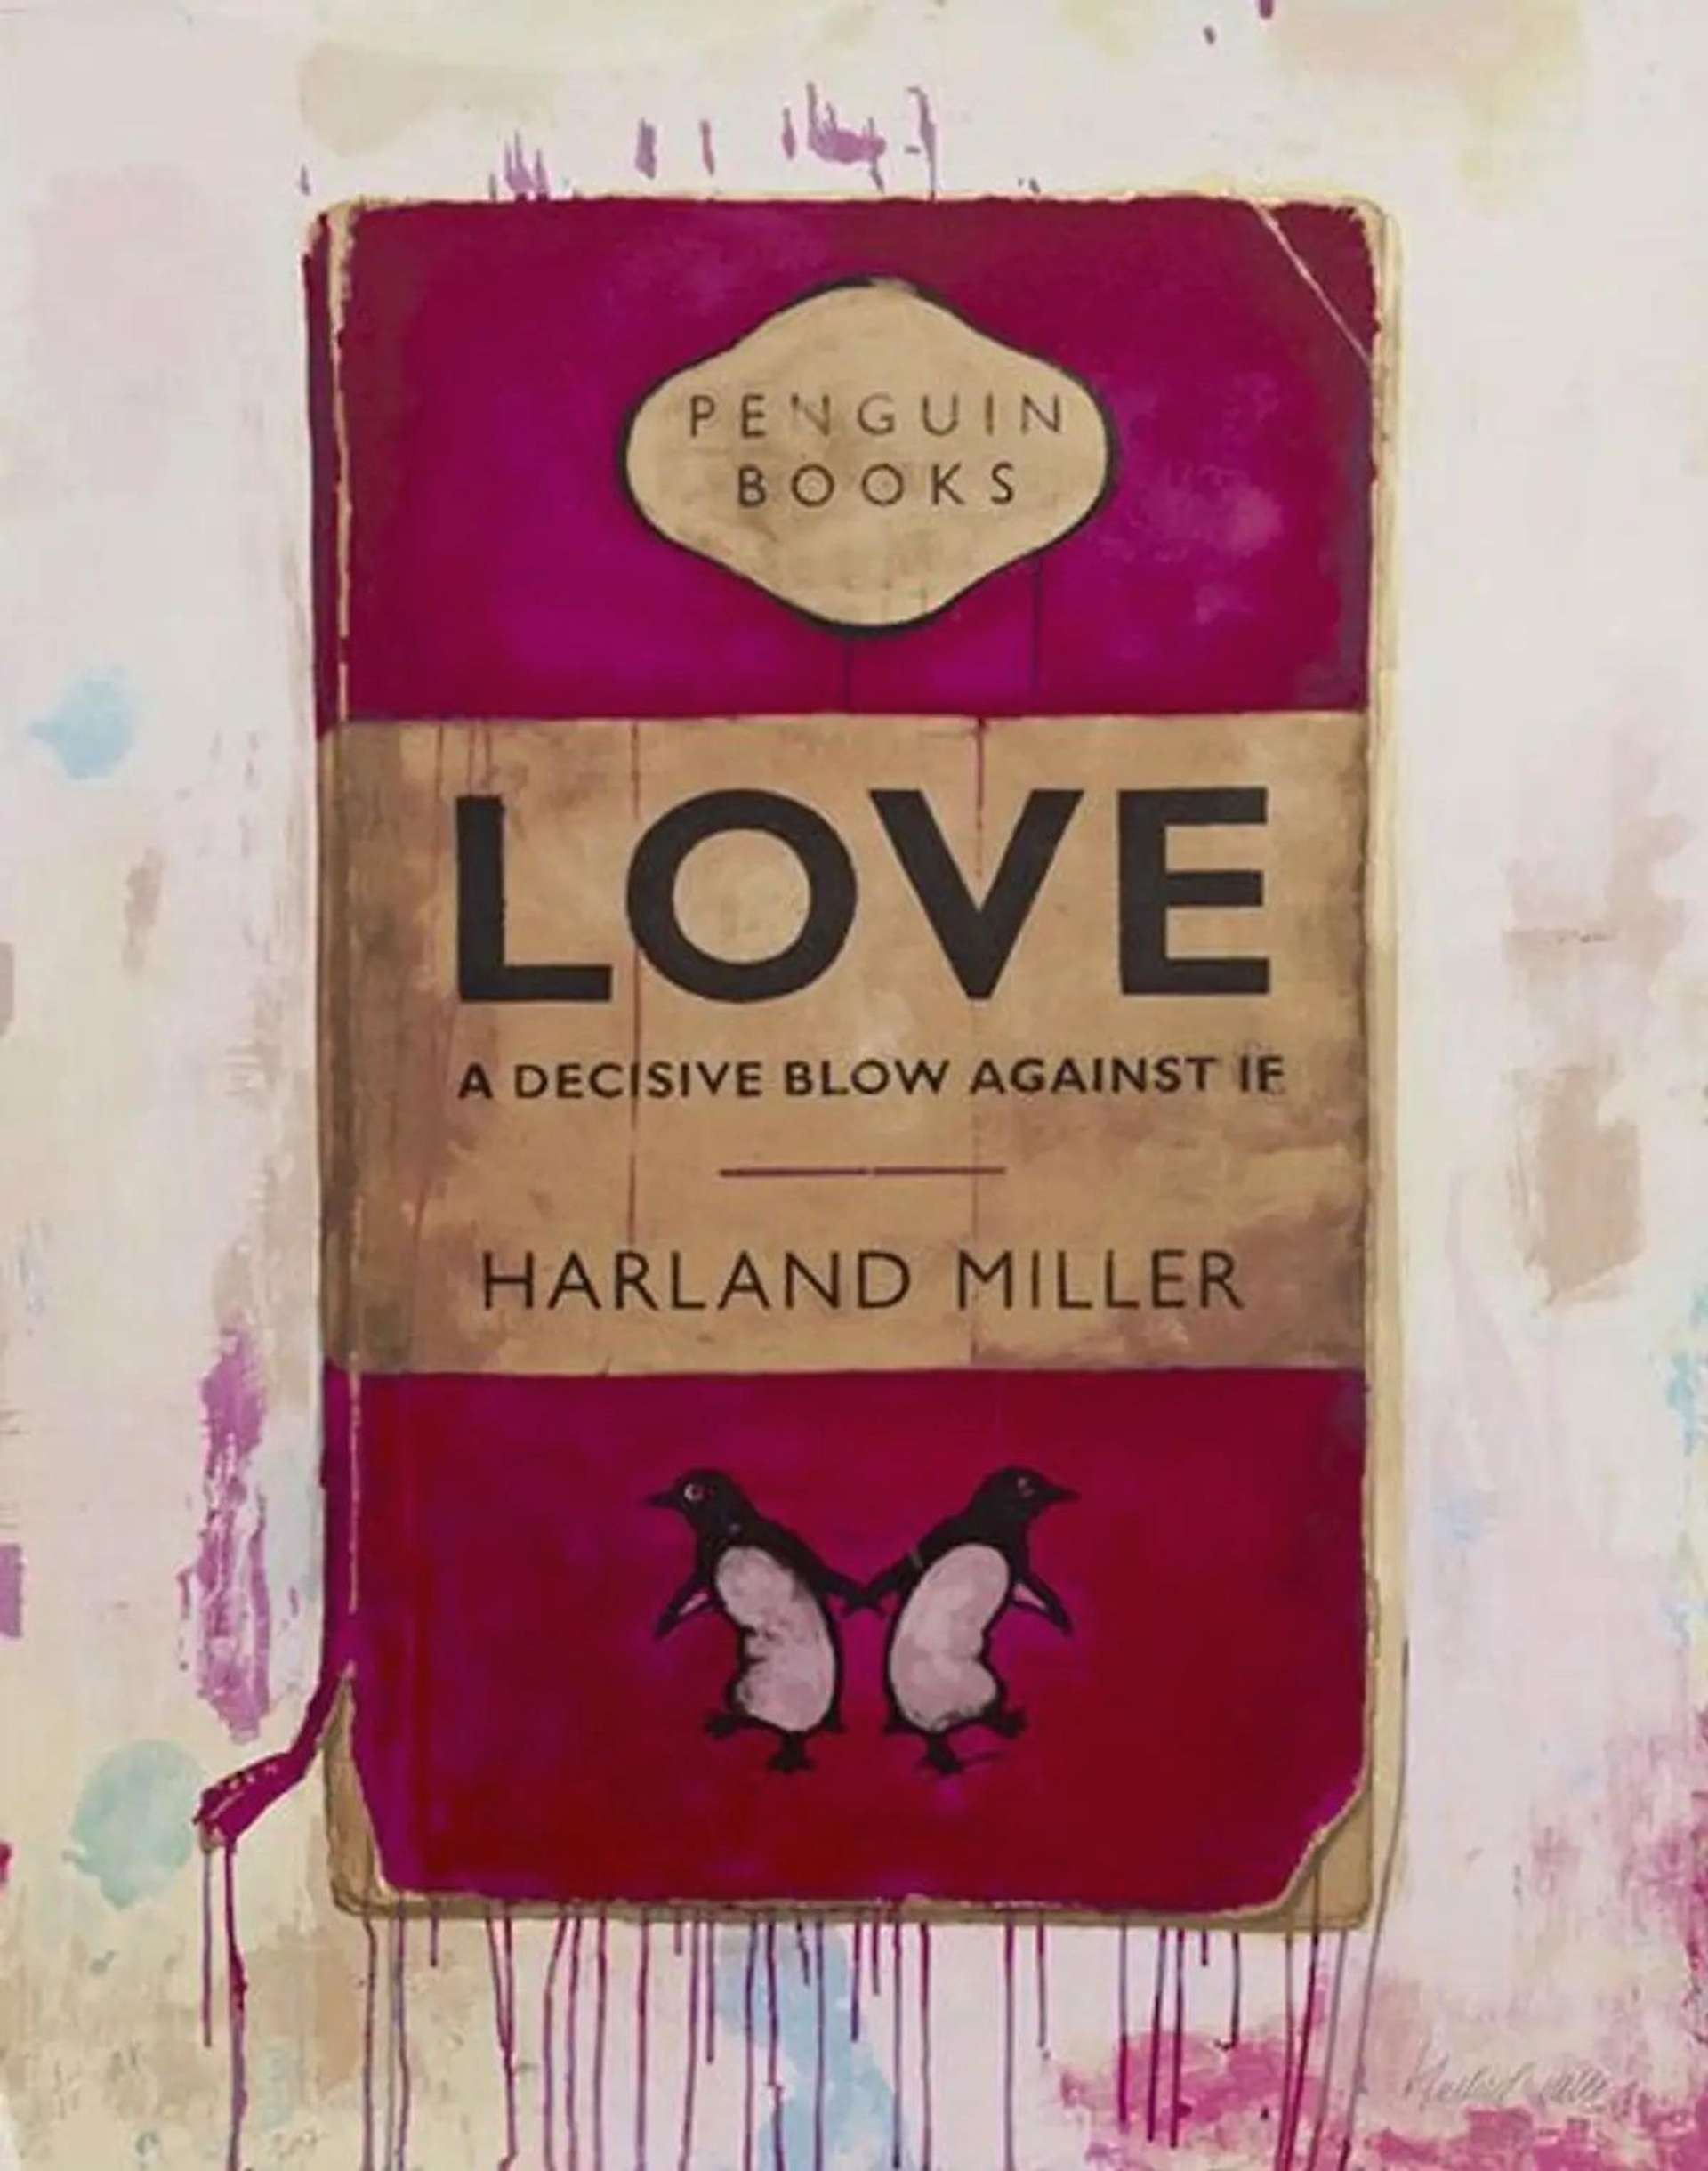 Love, A Decisive Blow Against If by Harland Miller - MyArtBroker 